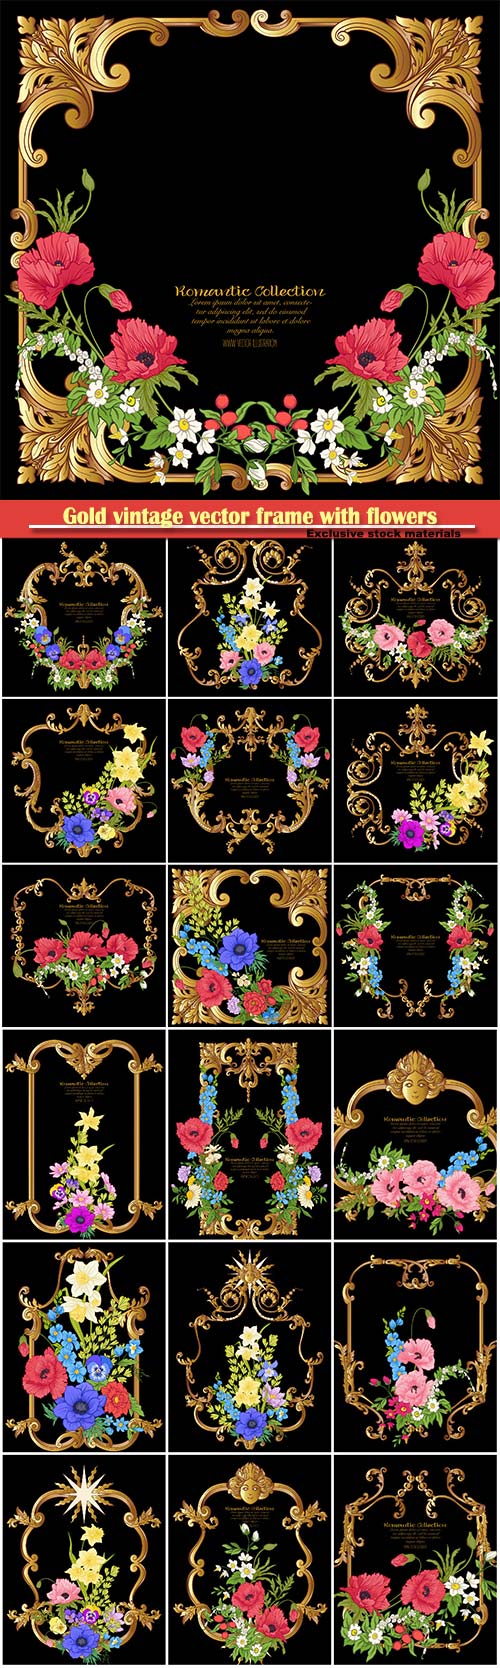 Gold vintage vector frame with flowers, poppy, daffodil, anemone